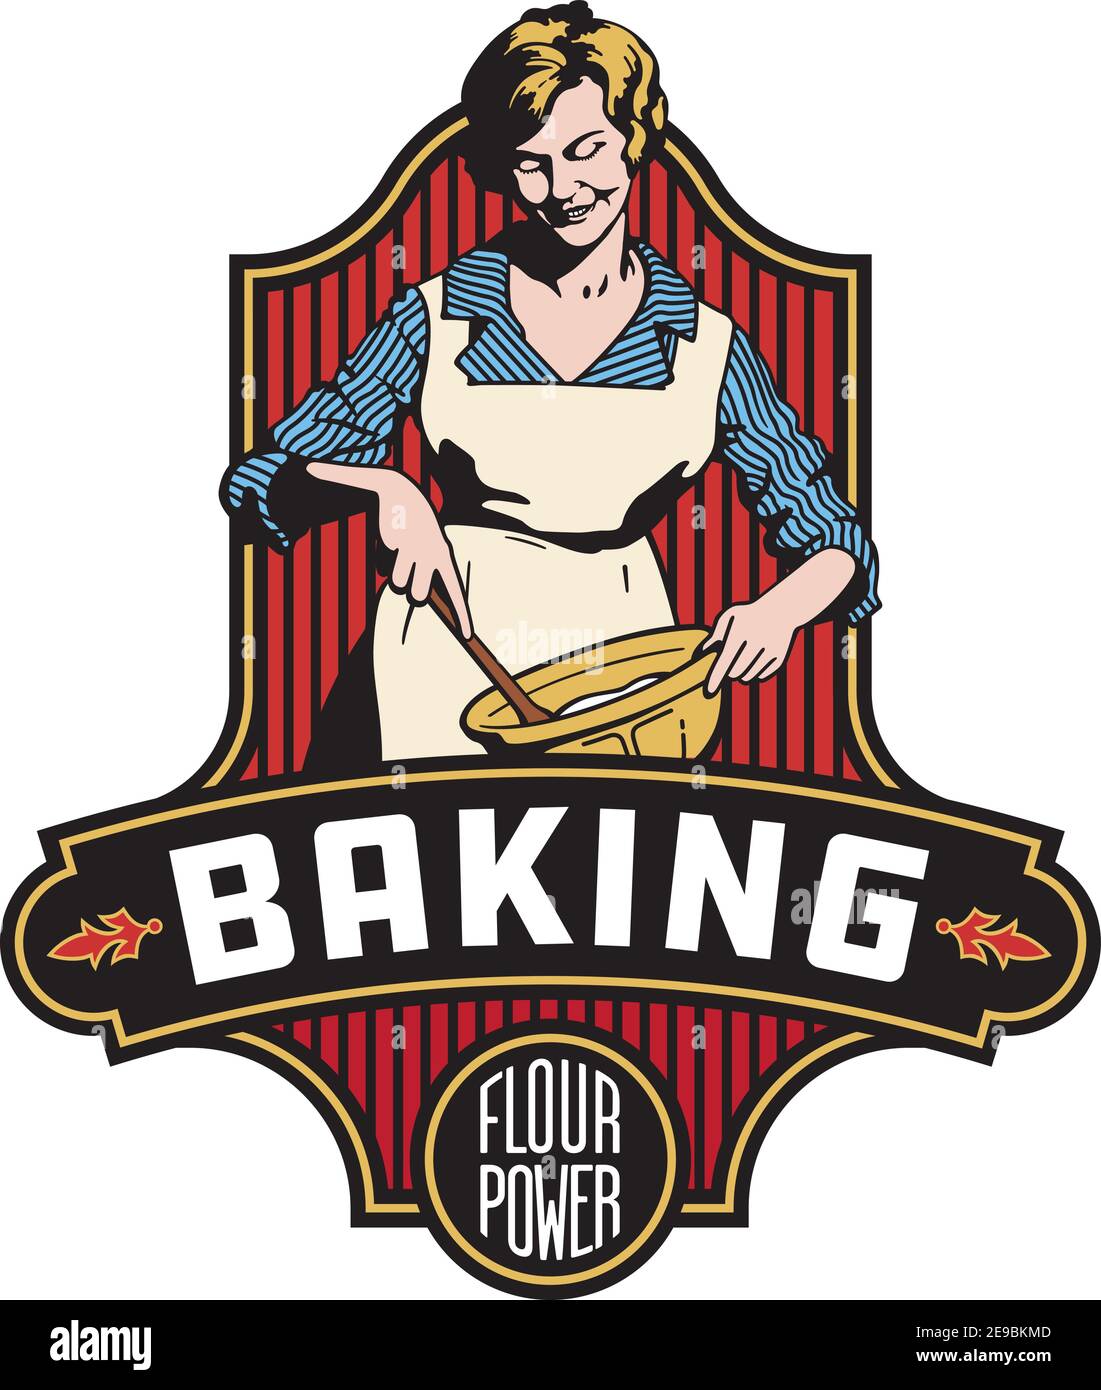 Vintage style baking badge illustration with decorative frame and banner and the phrase flour power. Retro vector drawing of baker mixing in bowl Stock Vector